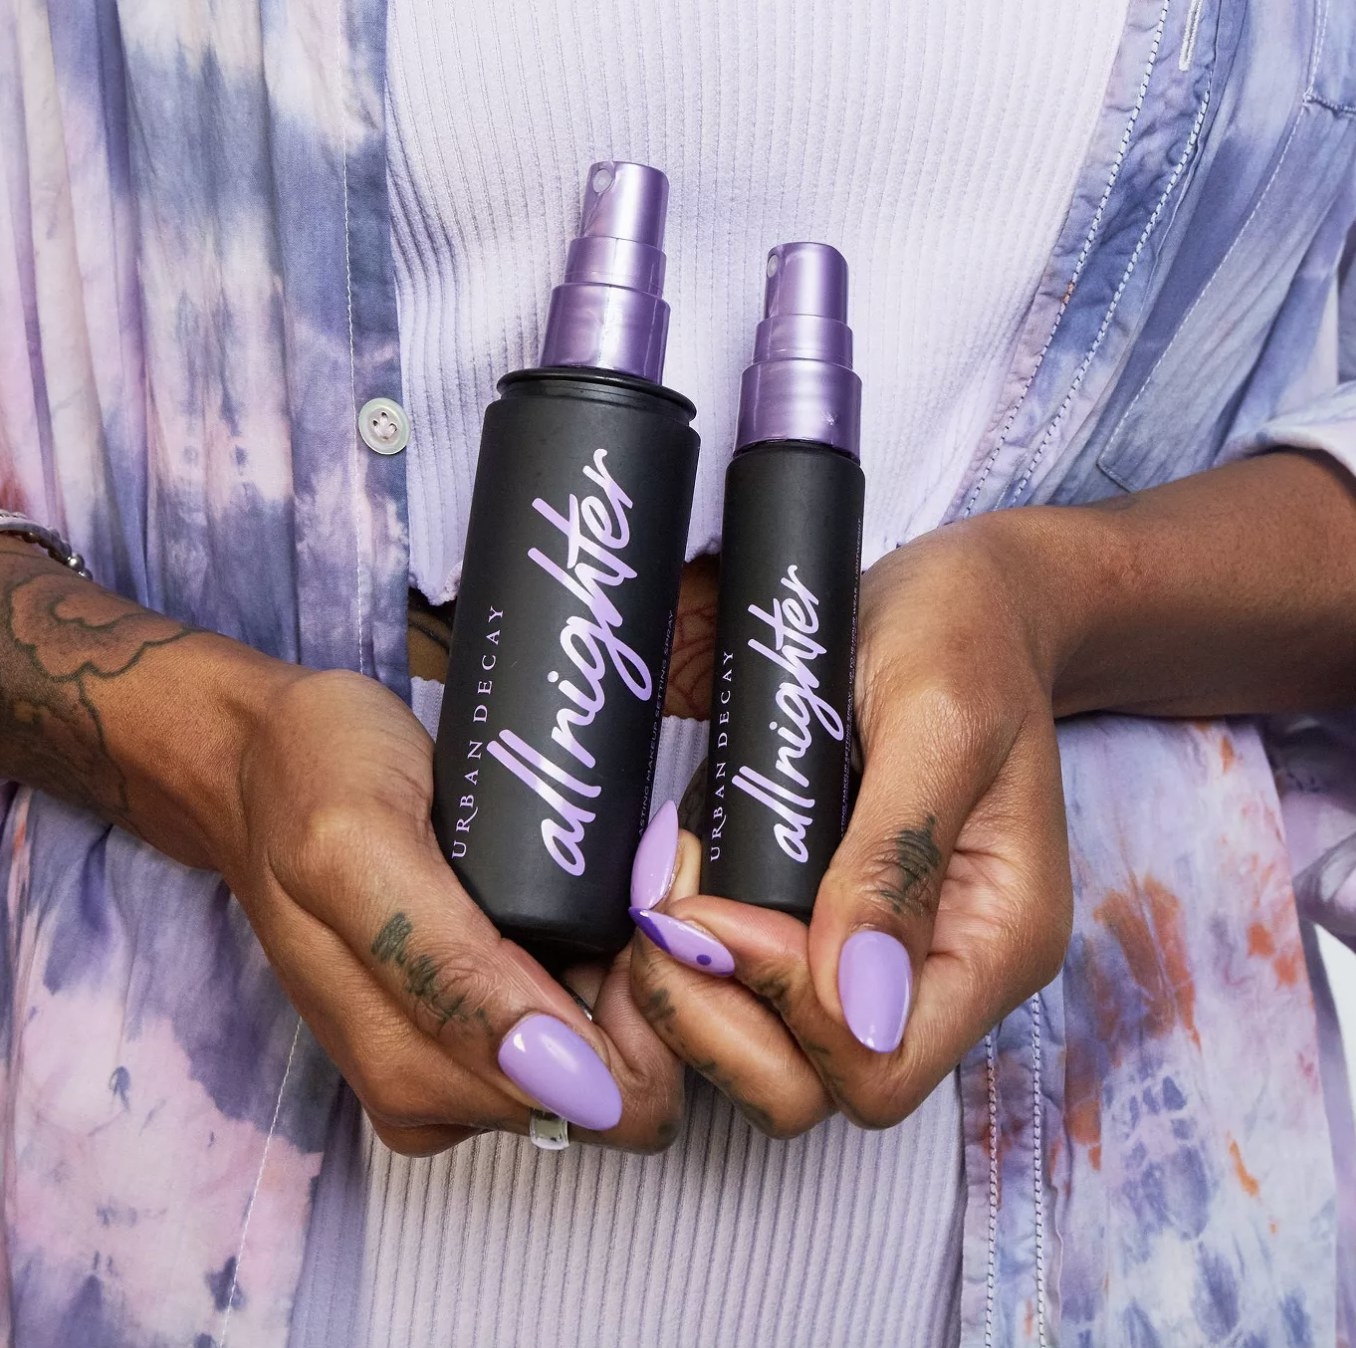 A woman holding two bottles of setting spray